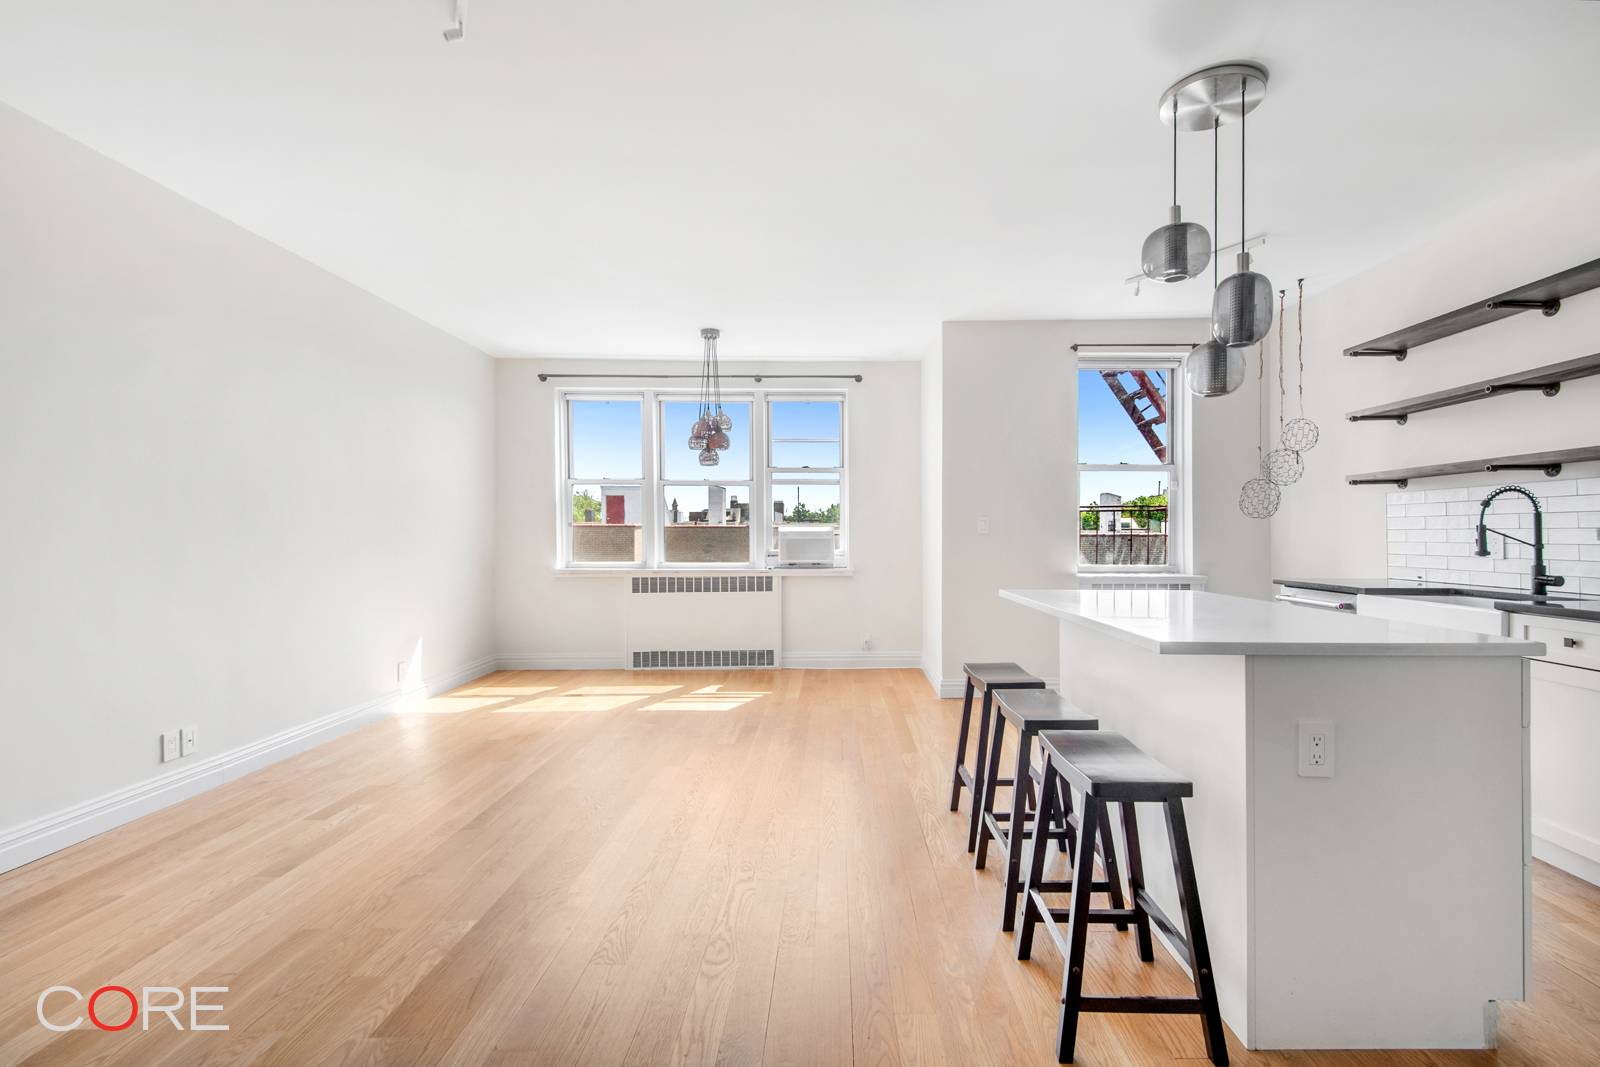 Immaculately renovated with the finest finishes and architectural imagination, this rare, top floor, one bedroom will have your attention the moment you enter.